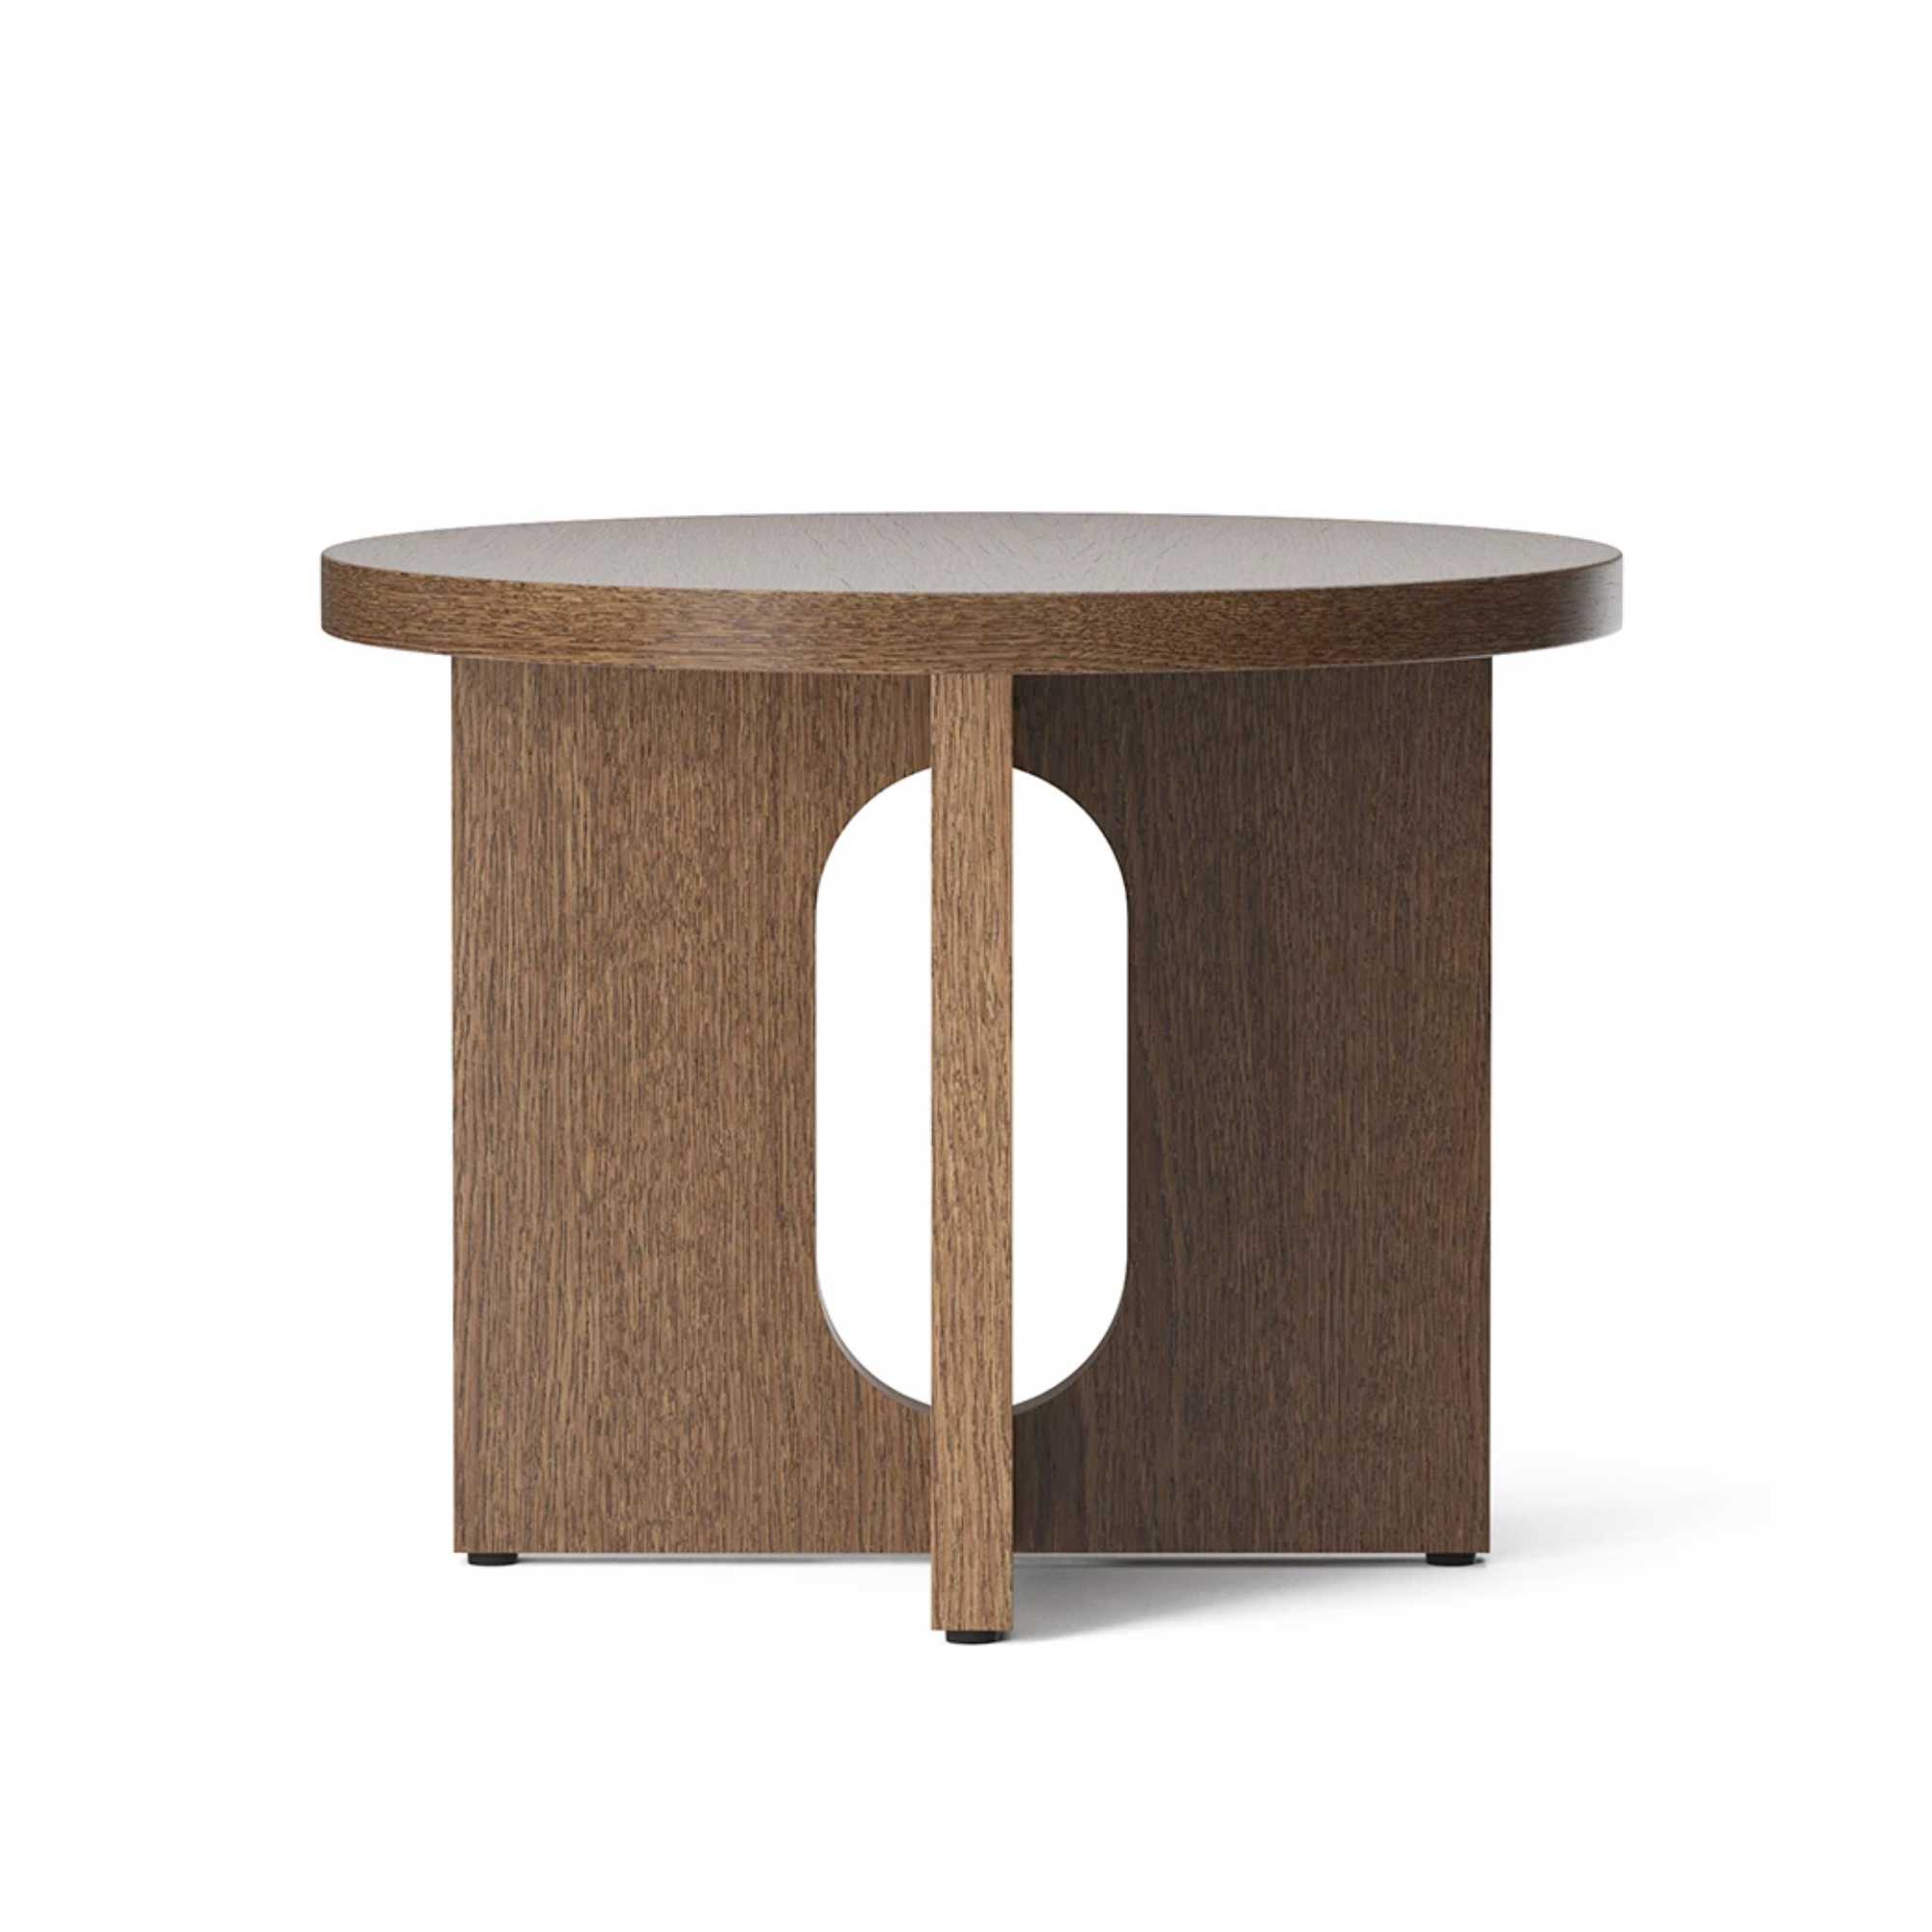 Audo Androgyne Side Table, Dark Stained Oak (ø50cm)